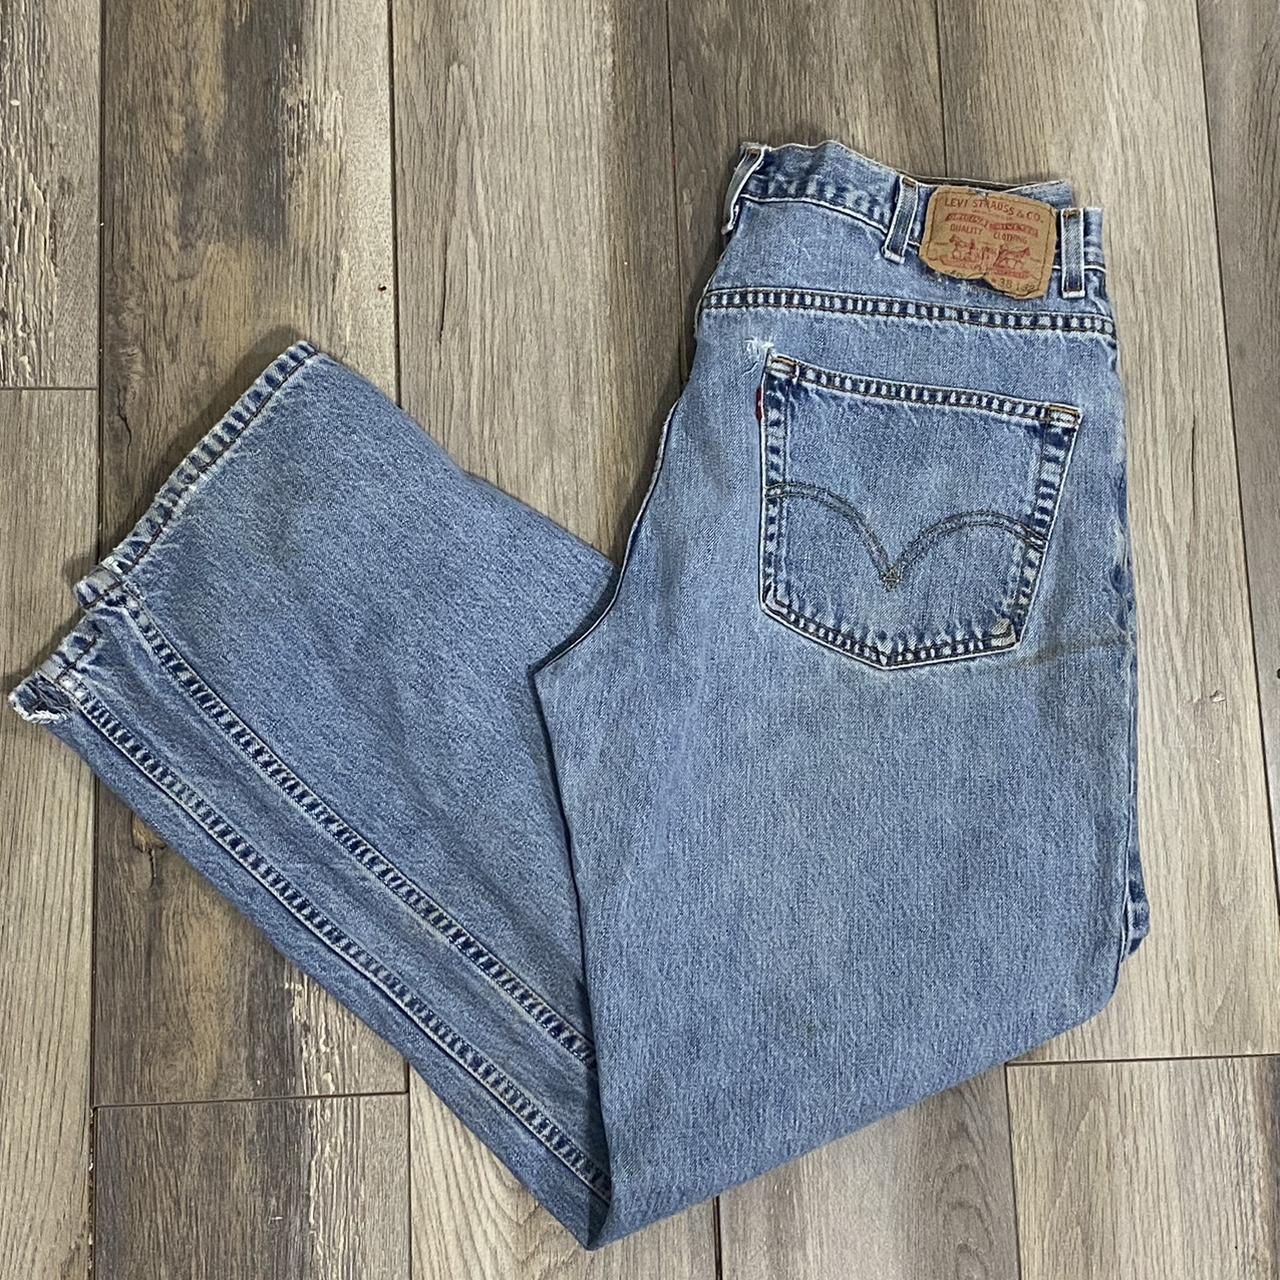 550 relaxed fit levi jeans 38x32 - Depop